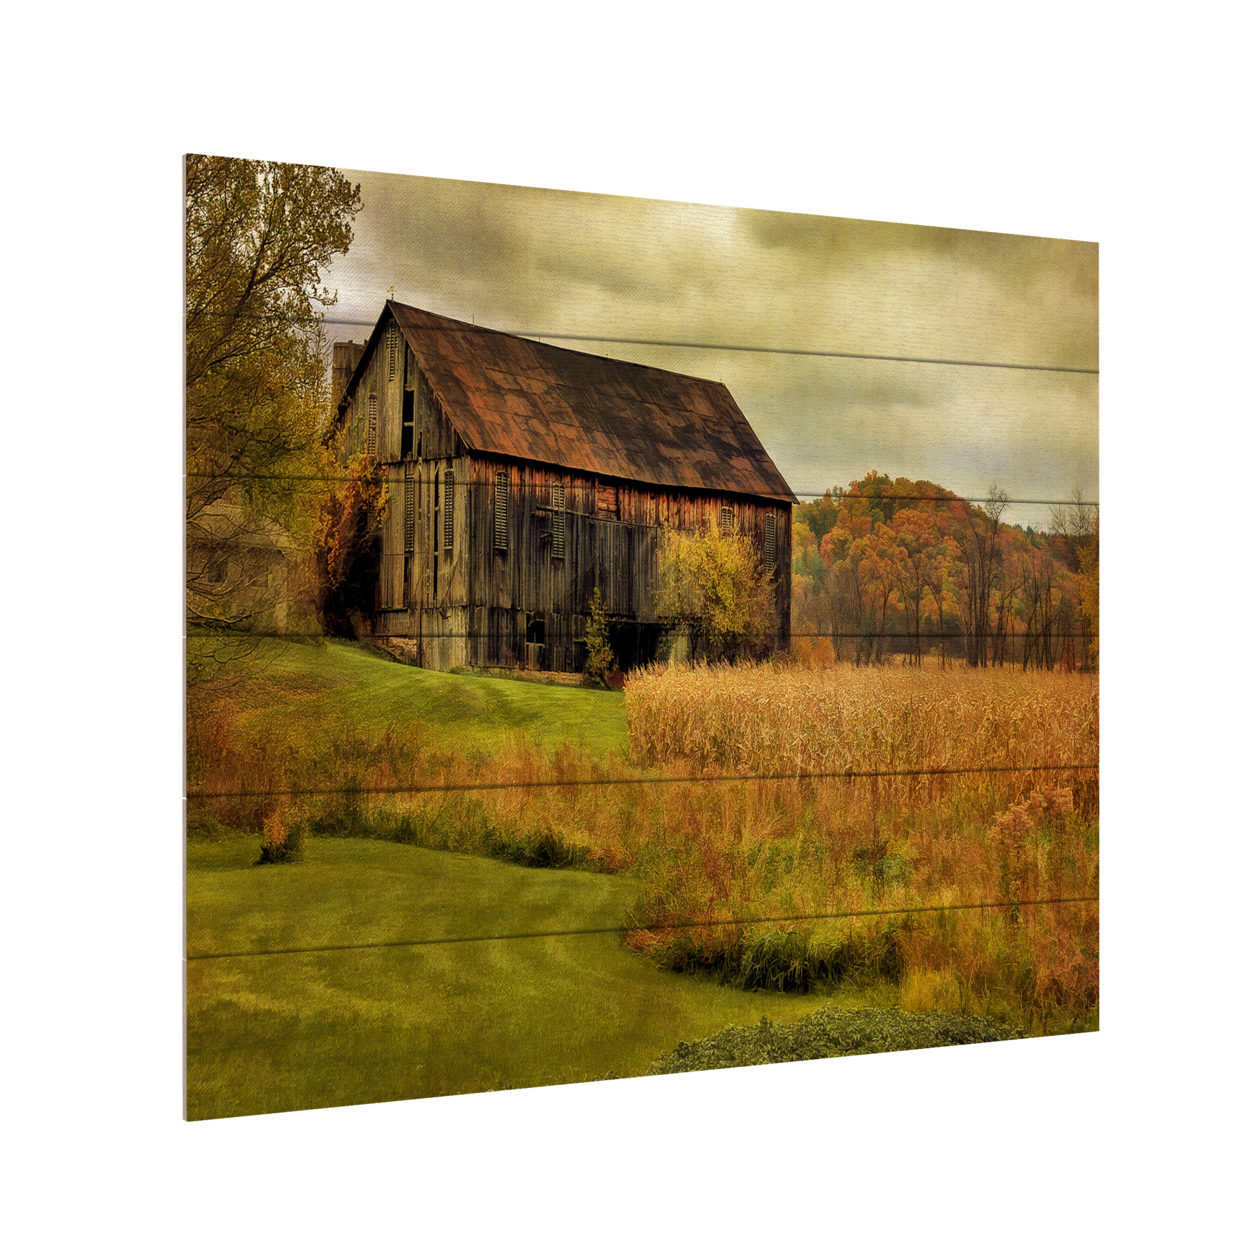 Wooden Slat Art 18 X 22 Inches Titled Old Barn On Rainy Day Ready To Hang Home Decor Picture